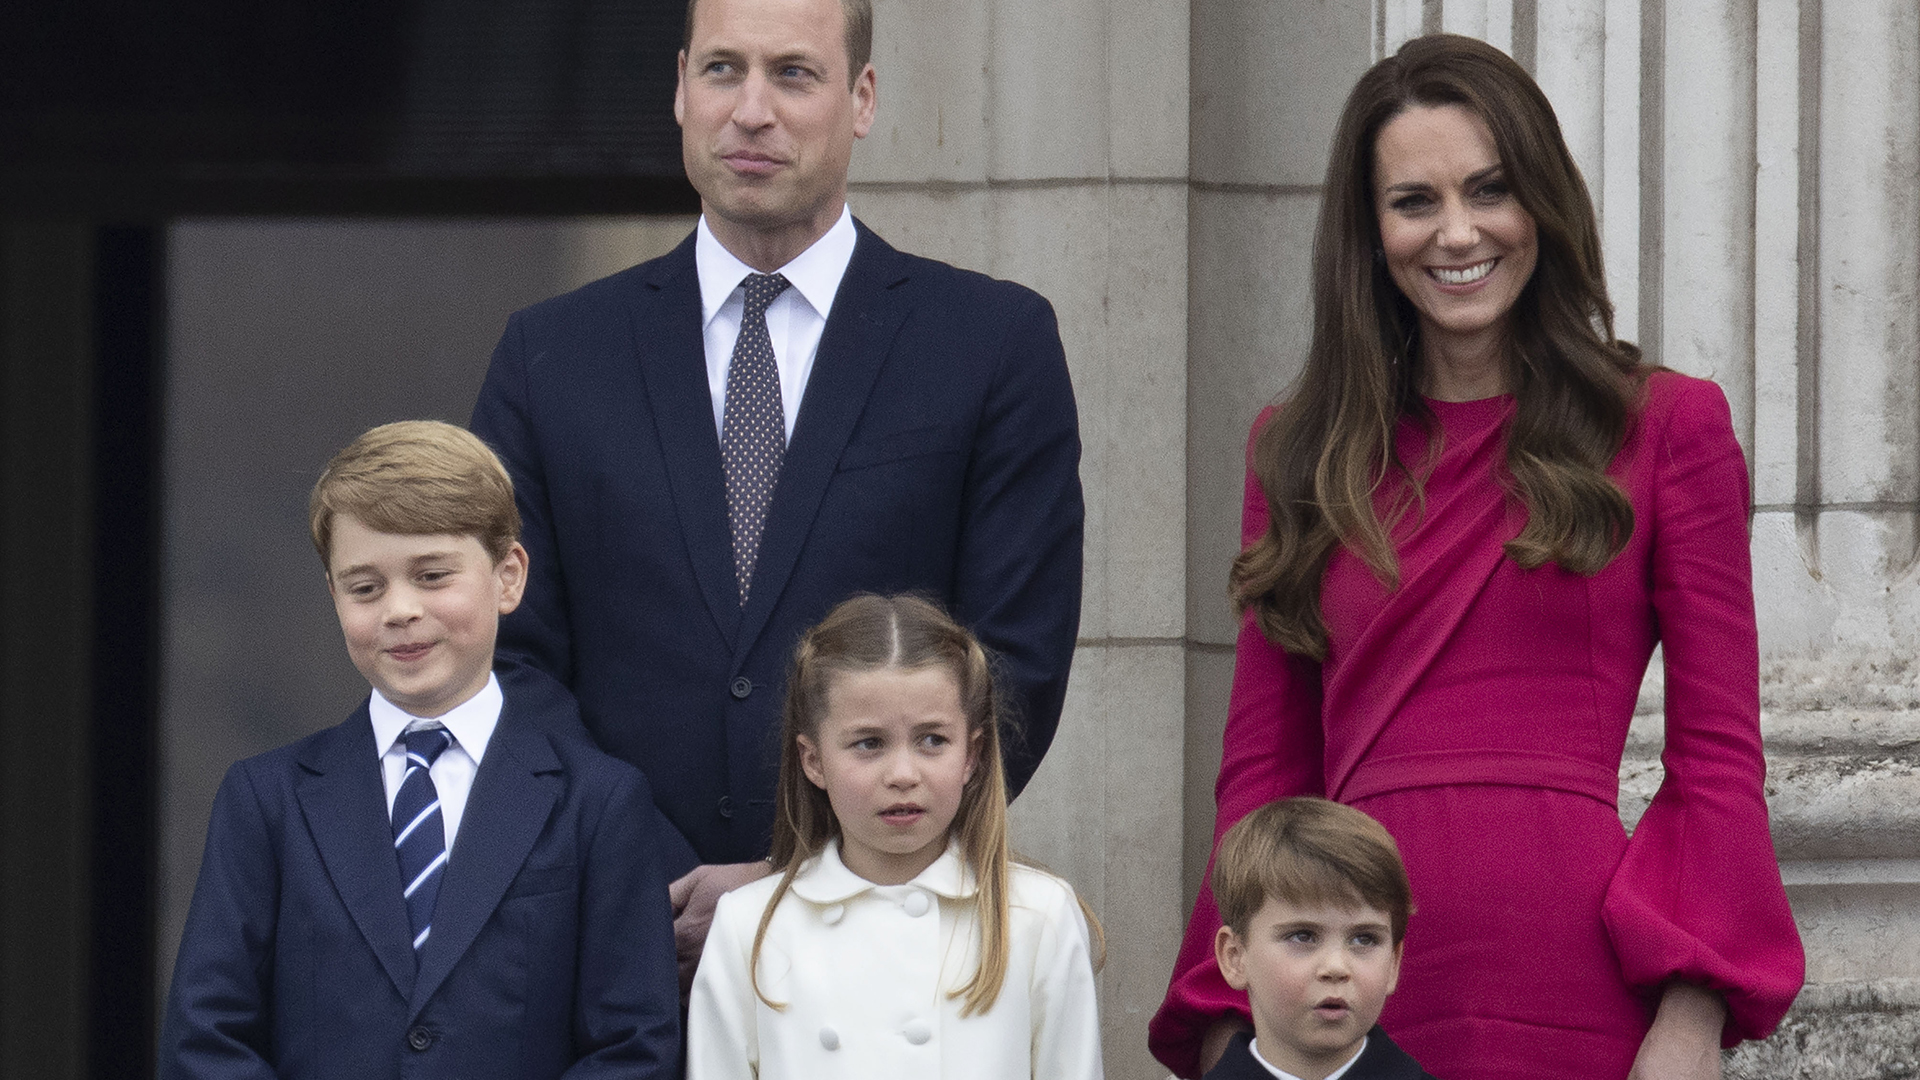 The Royal Naming Game: How to Pick a Name Fit for a King or Queen